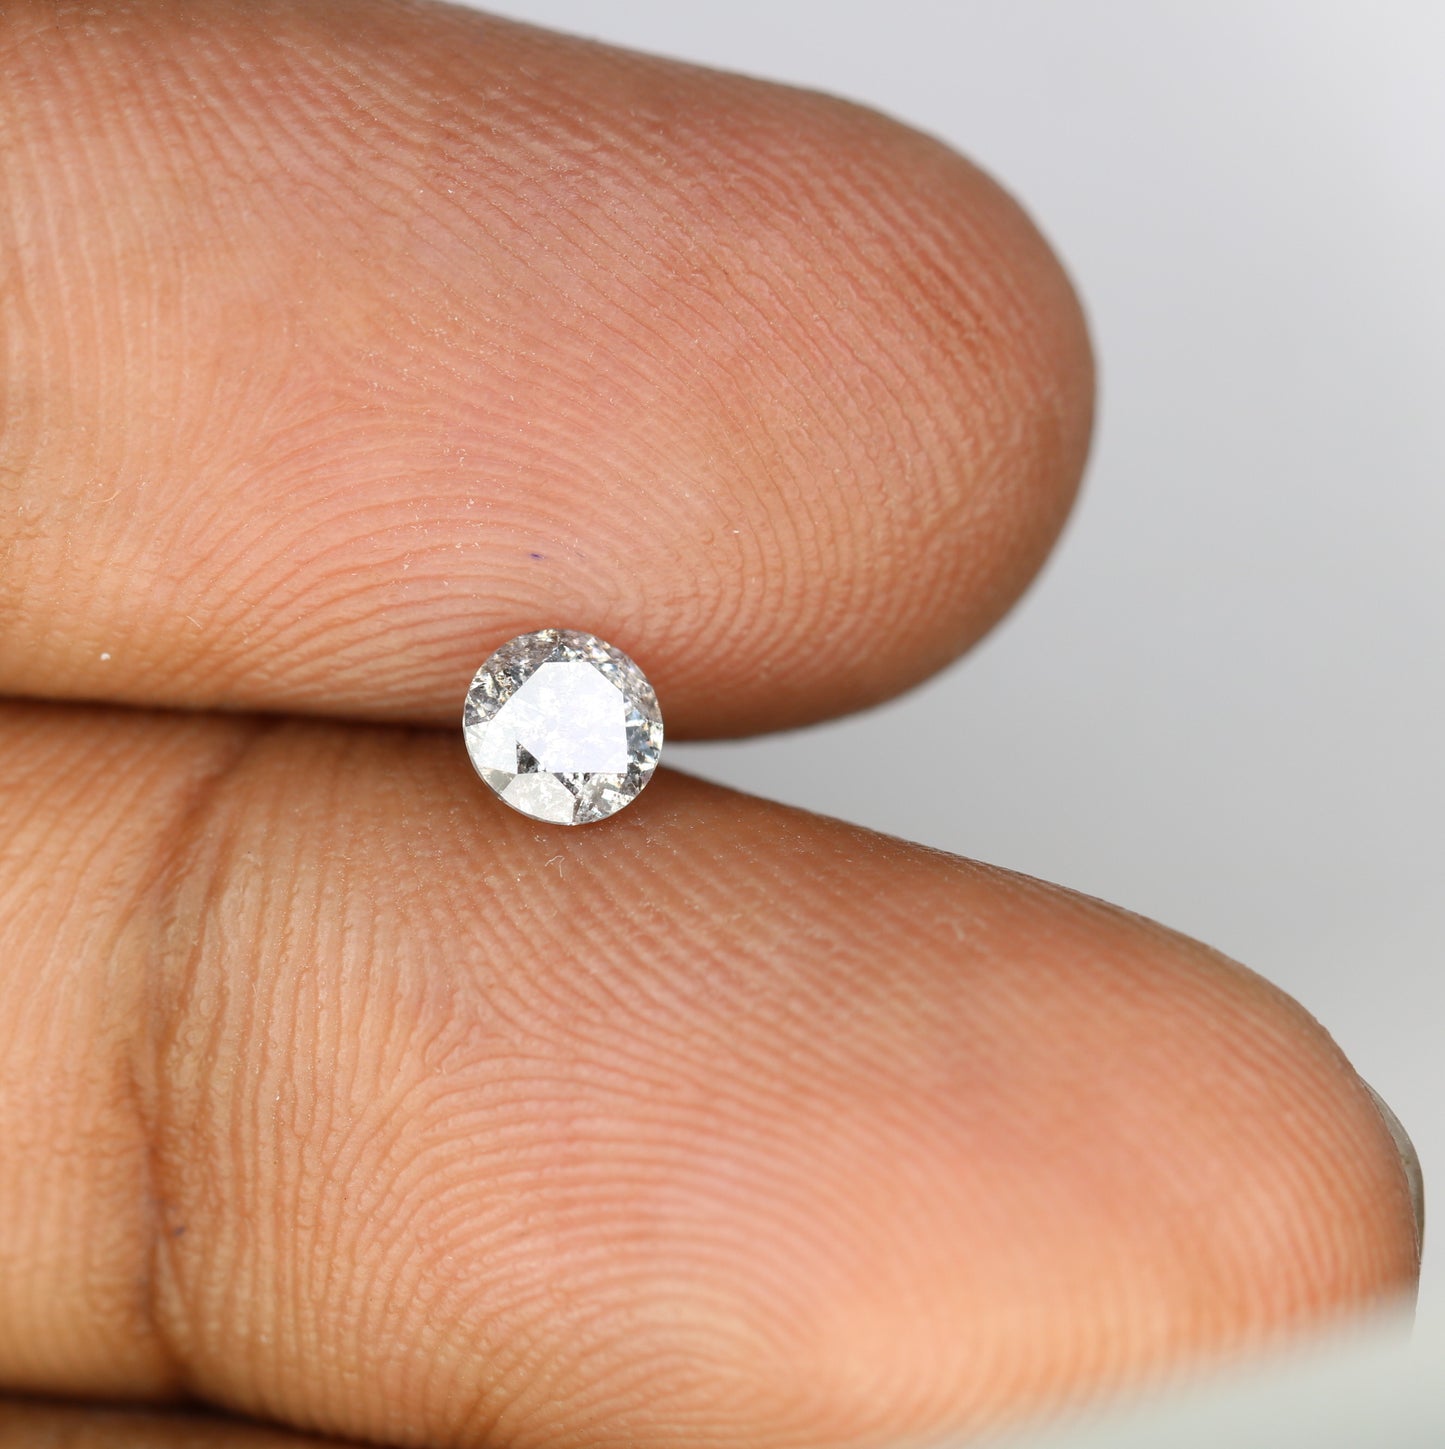 0.42 CT Salt And Pepper 4.60 x 2.90 MM Loose Round Brilliant Cut Diamond For Engagement Ring